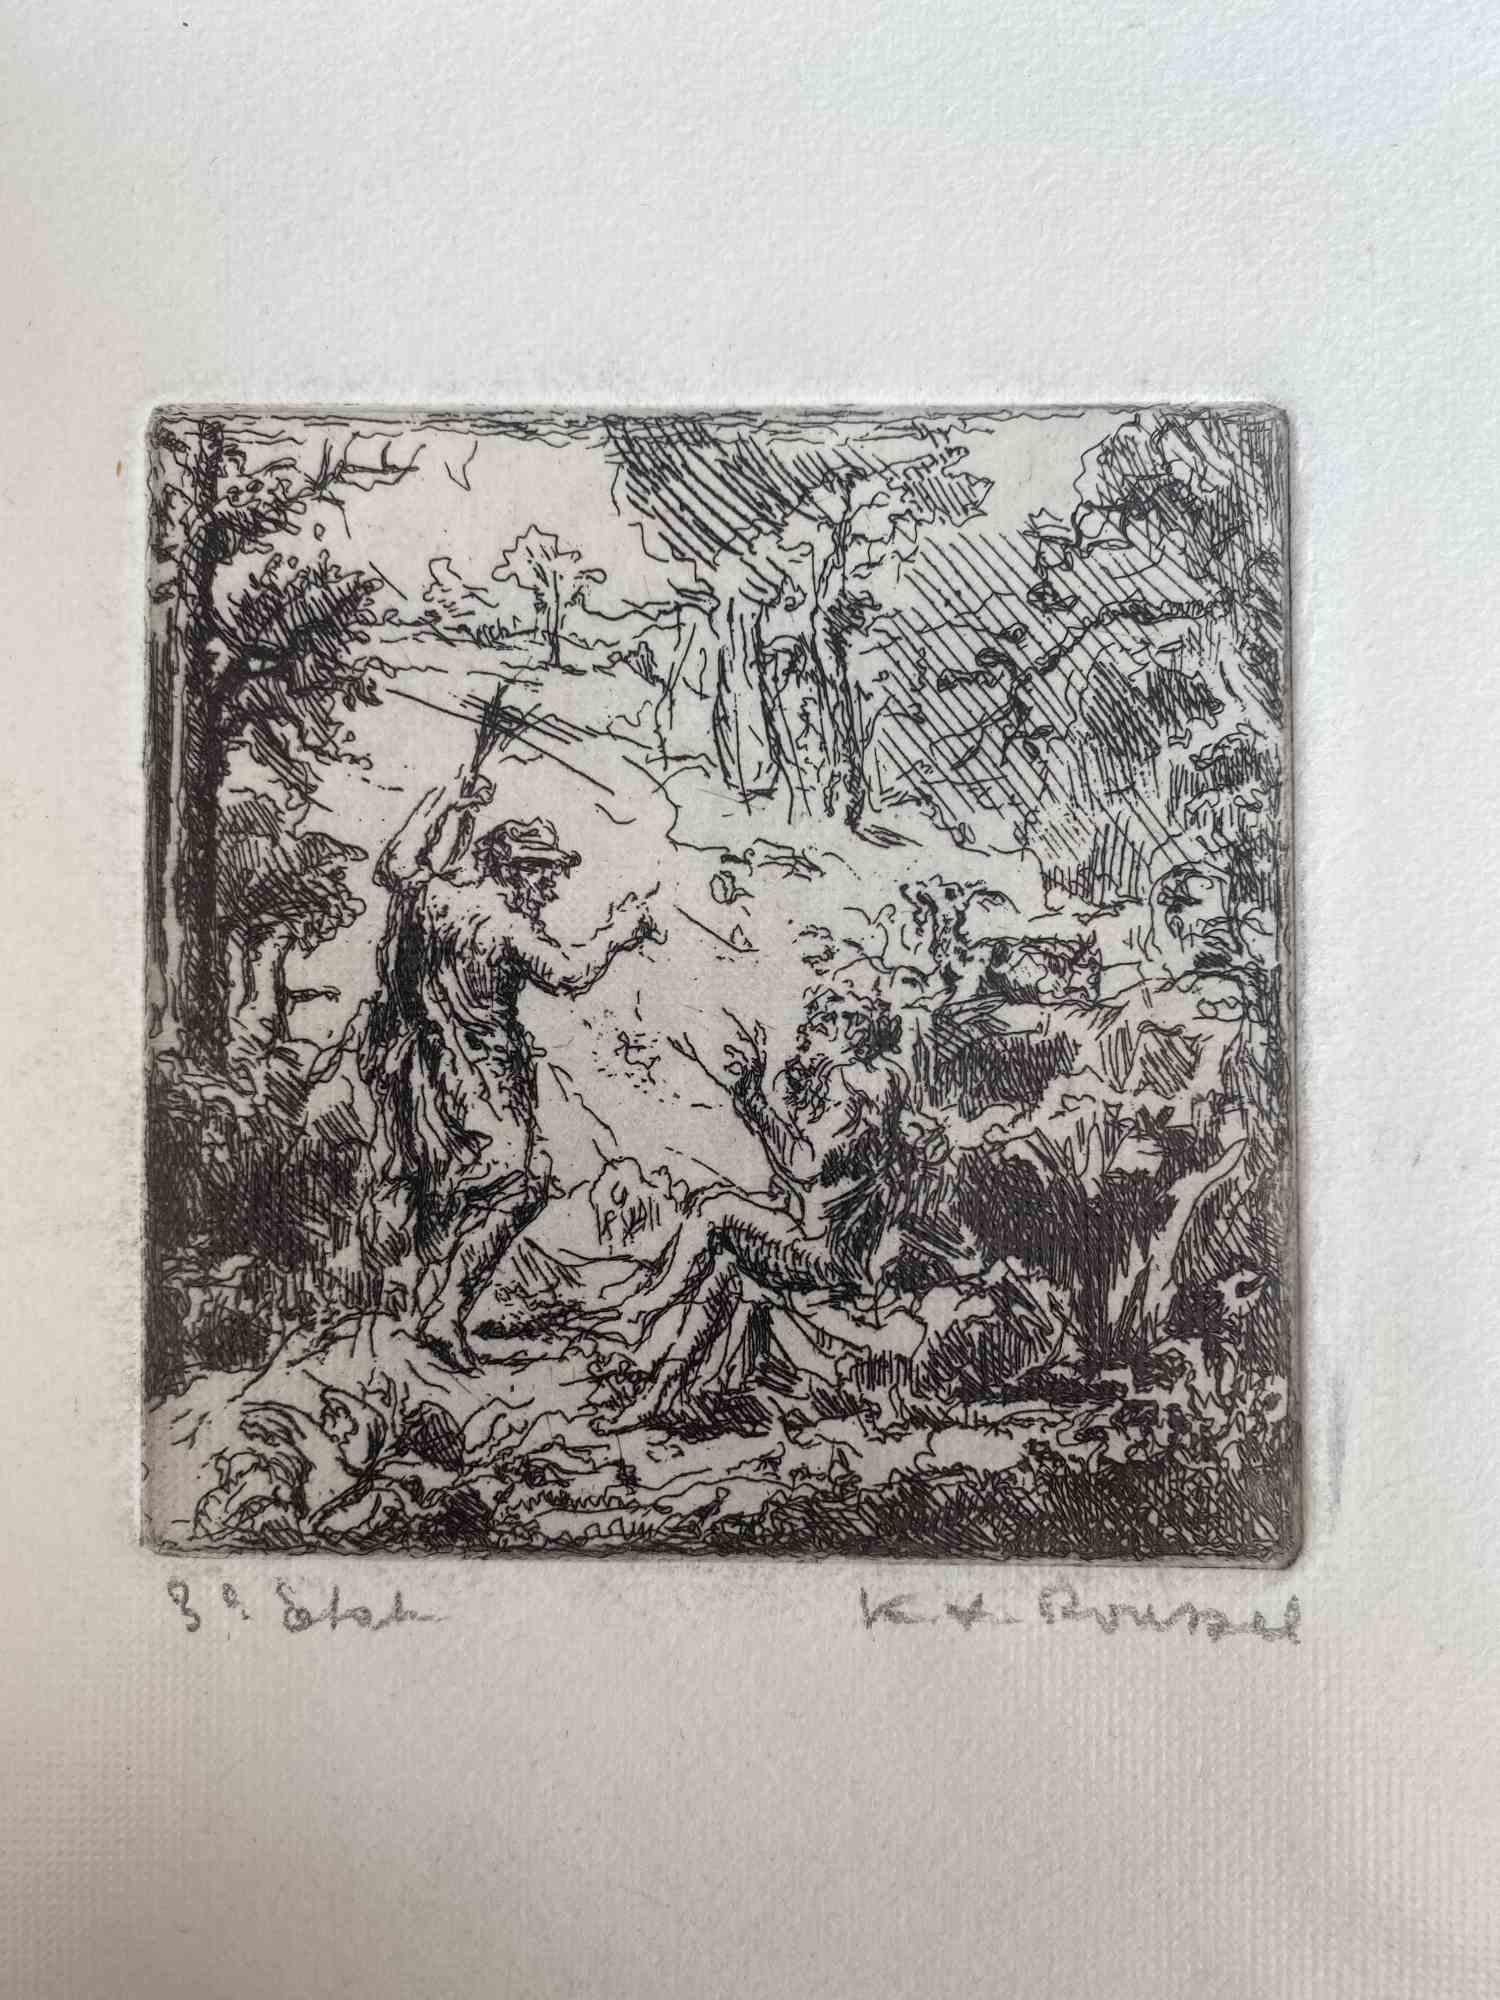 Pastorales is an original etching print artwork on ivory-colored paper realized by Ker-Xavier Roussel in 1920 ca.

Hand-Signed on the lower right margin.

Very Good conditions.

Ker-Xavier Roussel (Lorry-les-Metz,1867 – L'Étang-La-Ville, 1944), the